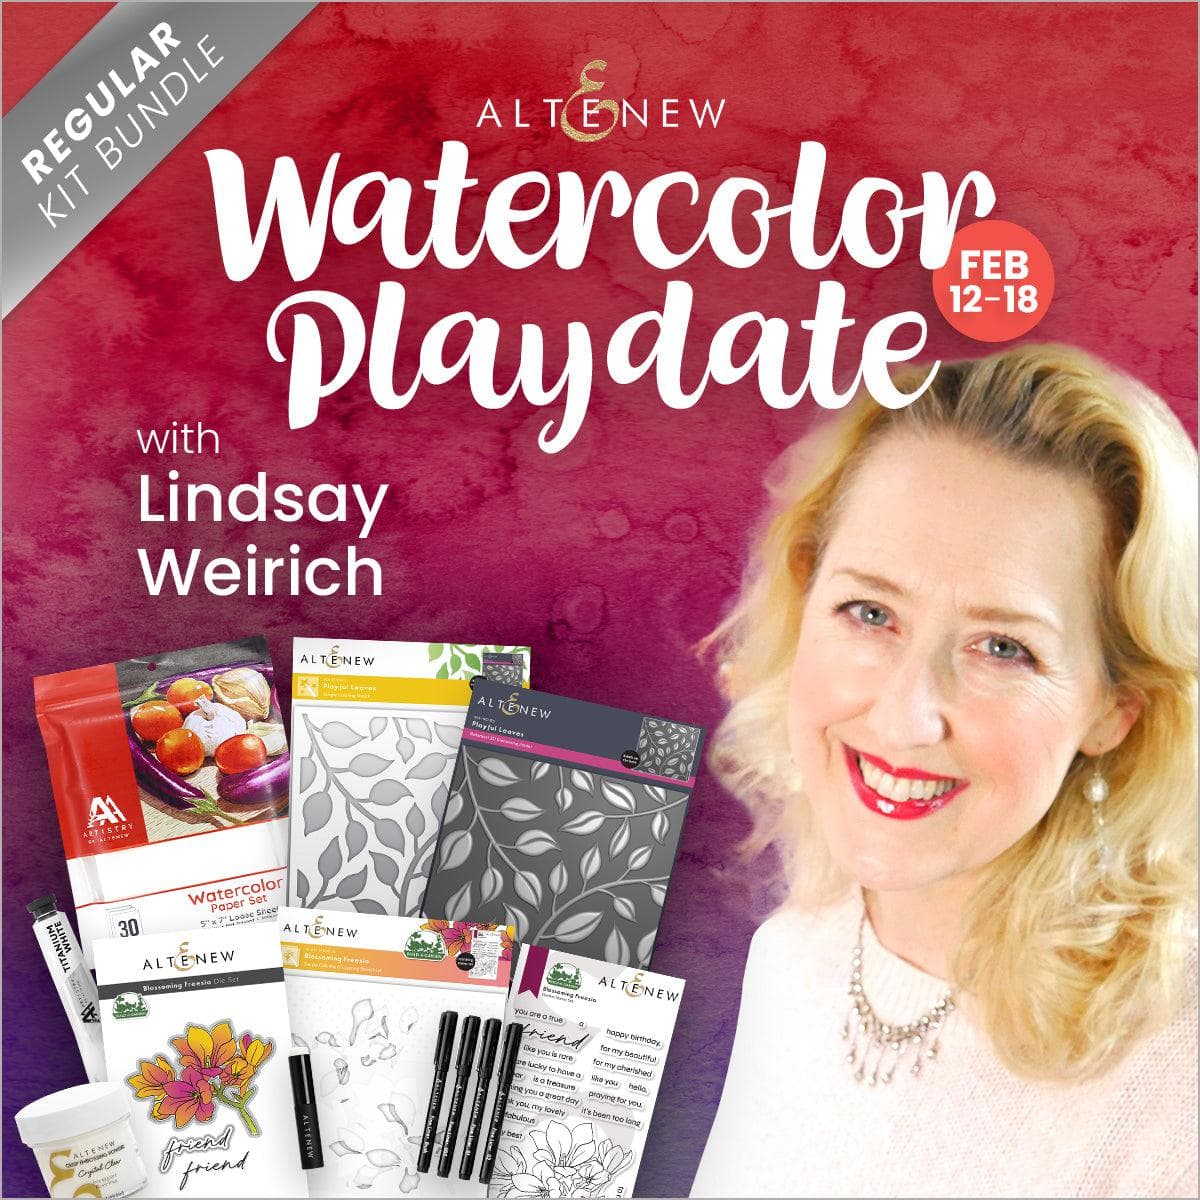 Watercolor Playdate with Lindsay Weirich